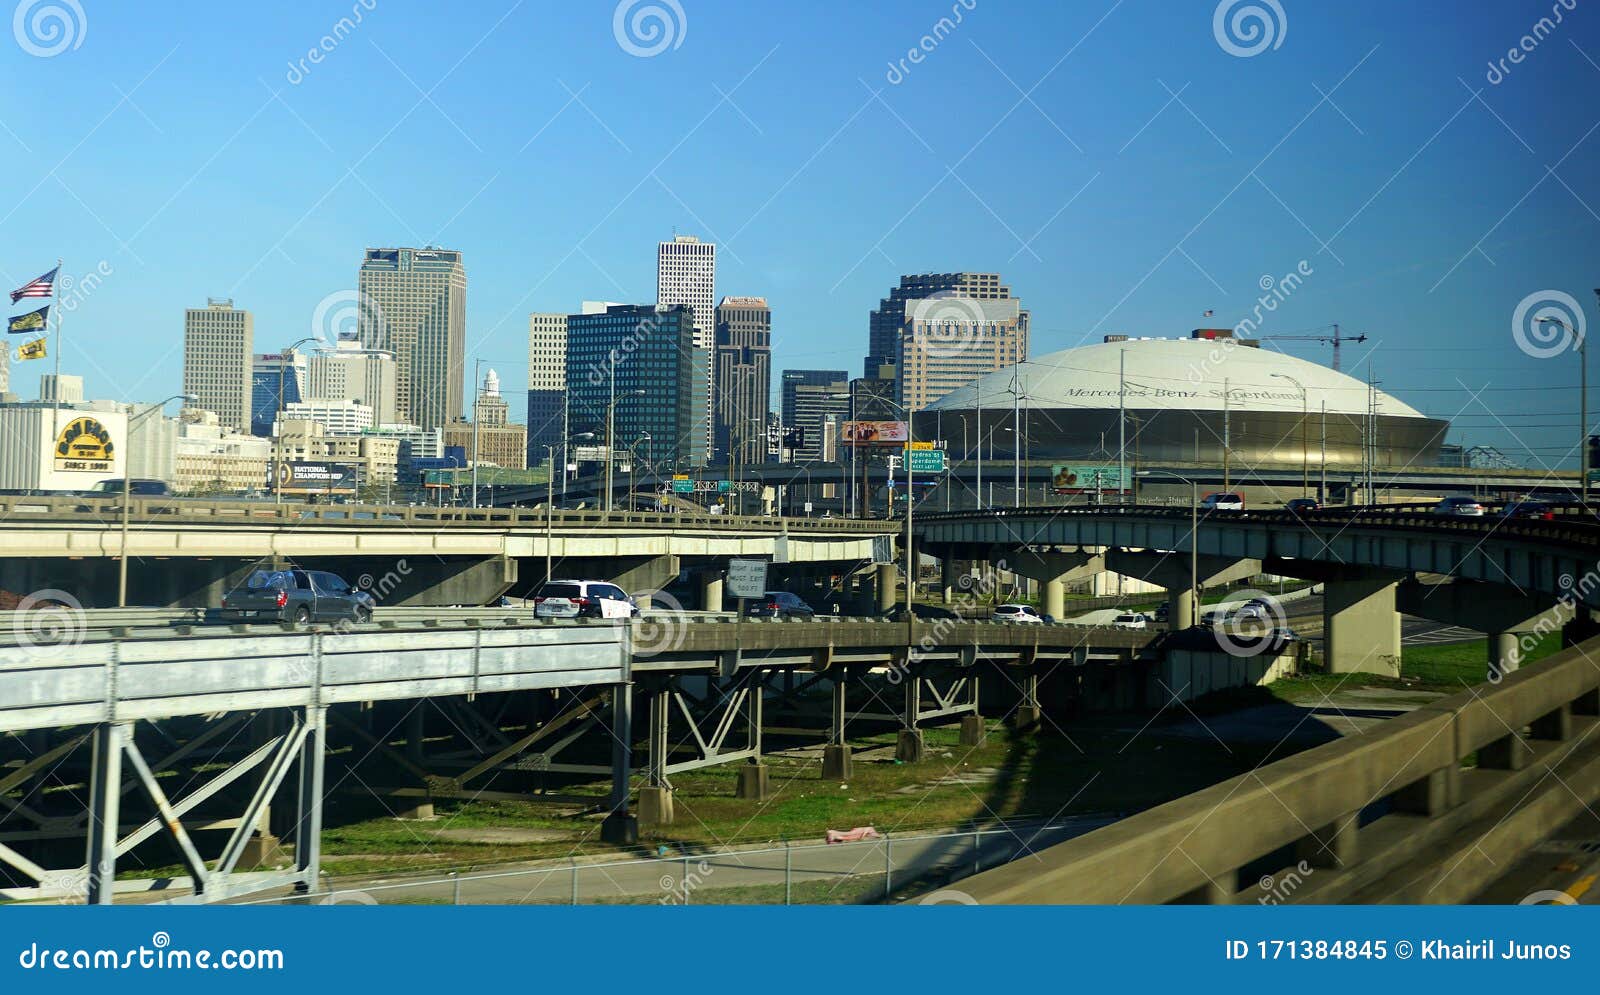 New Orleans, Louisiana, U.S.A - February 2, 2020 - The View Of The Traffic, Buildings And ...